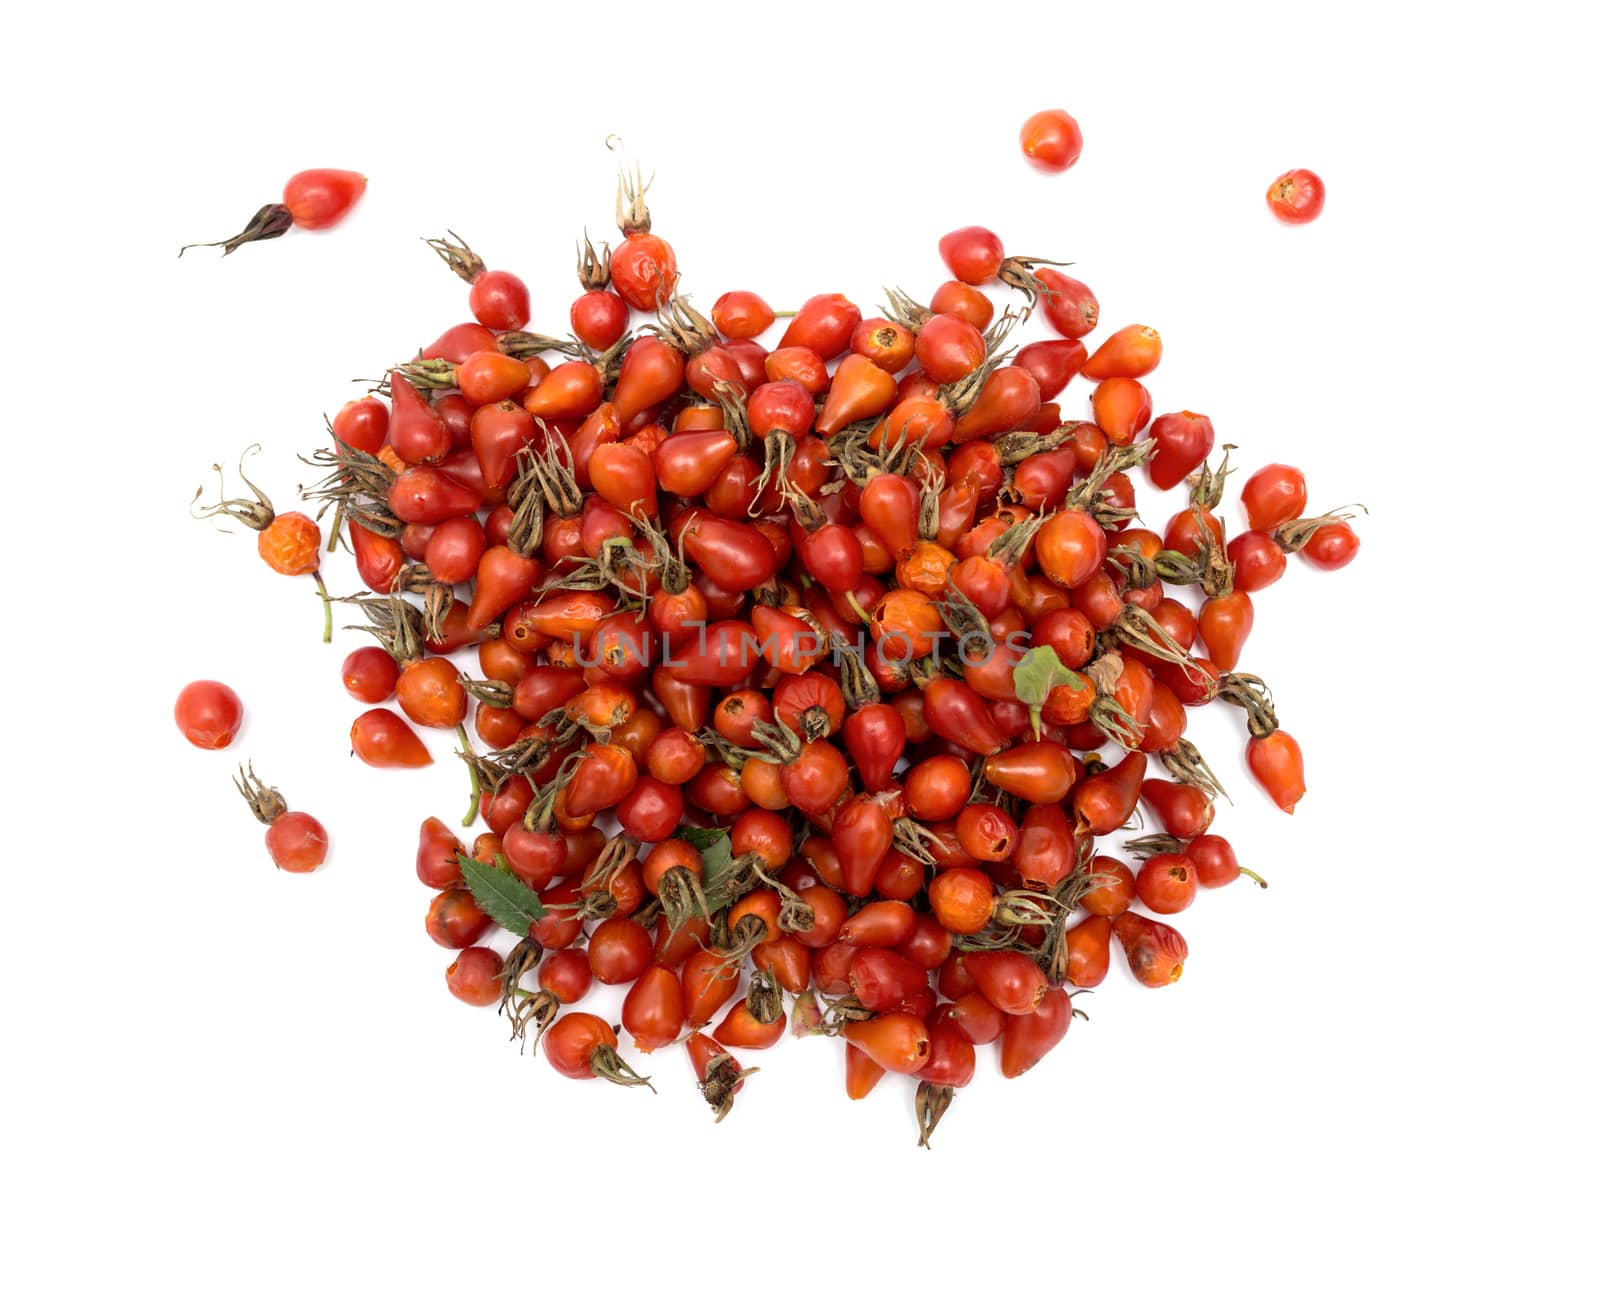 Rosehips isolated on white background by DNKSTUDIO